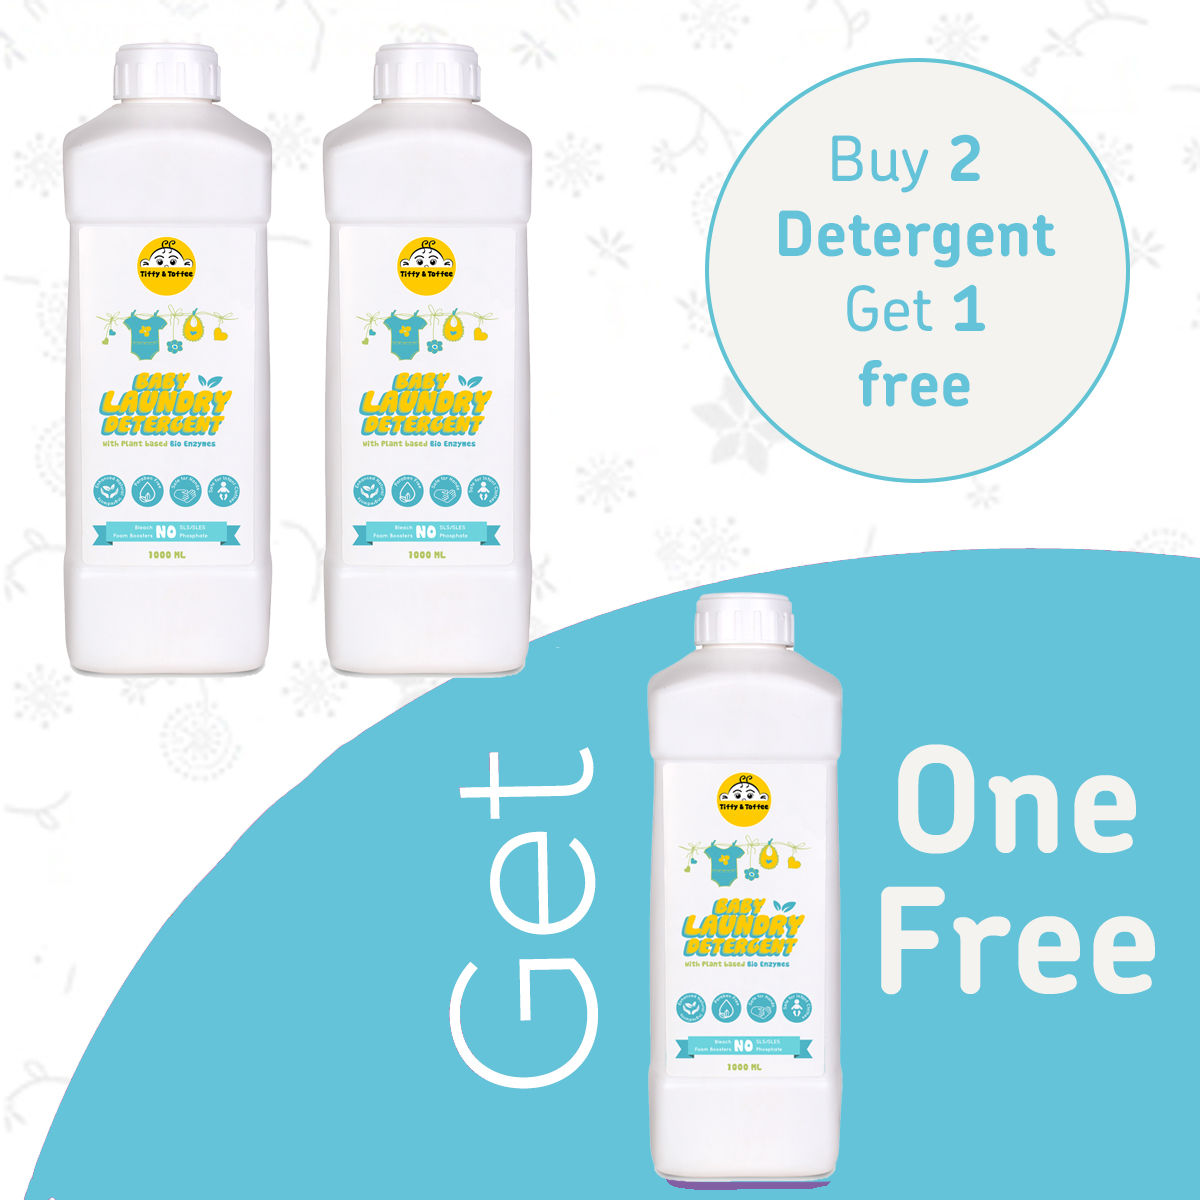 Tiffy & Toffee Baby Laundry Detergent Buy 2 Get 1 Free